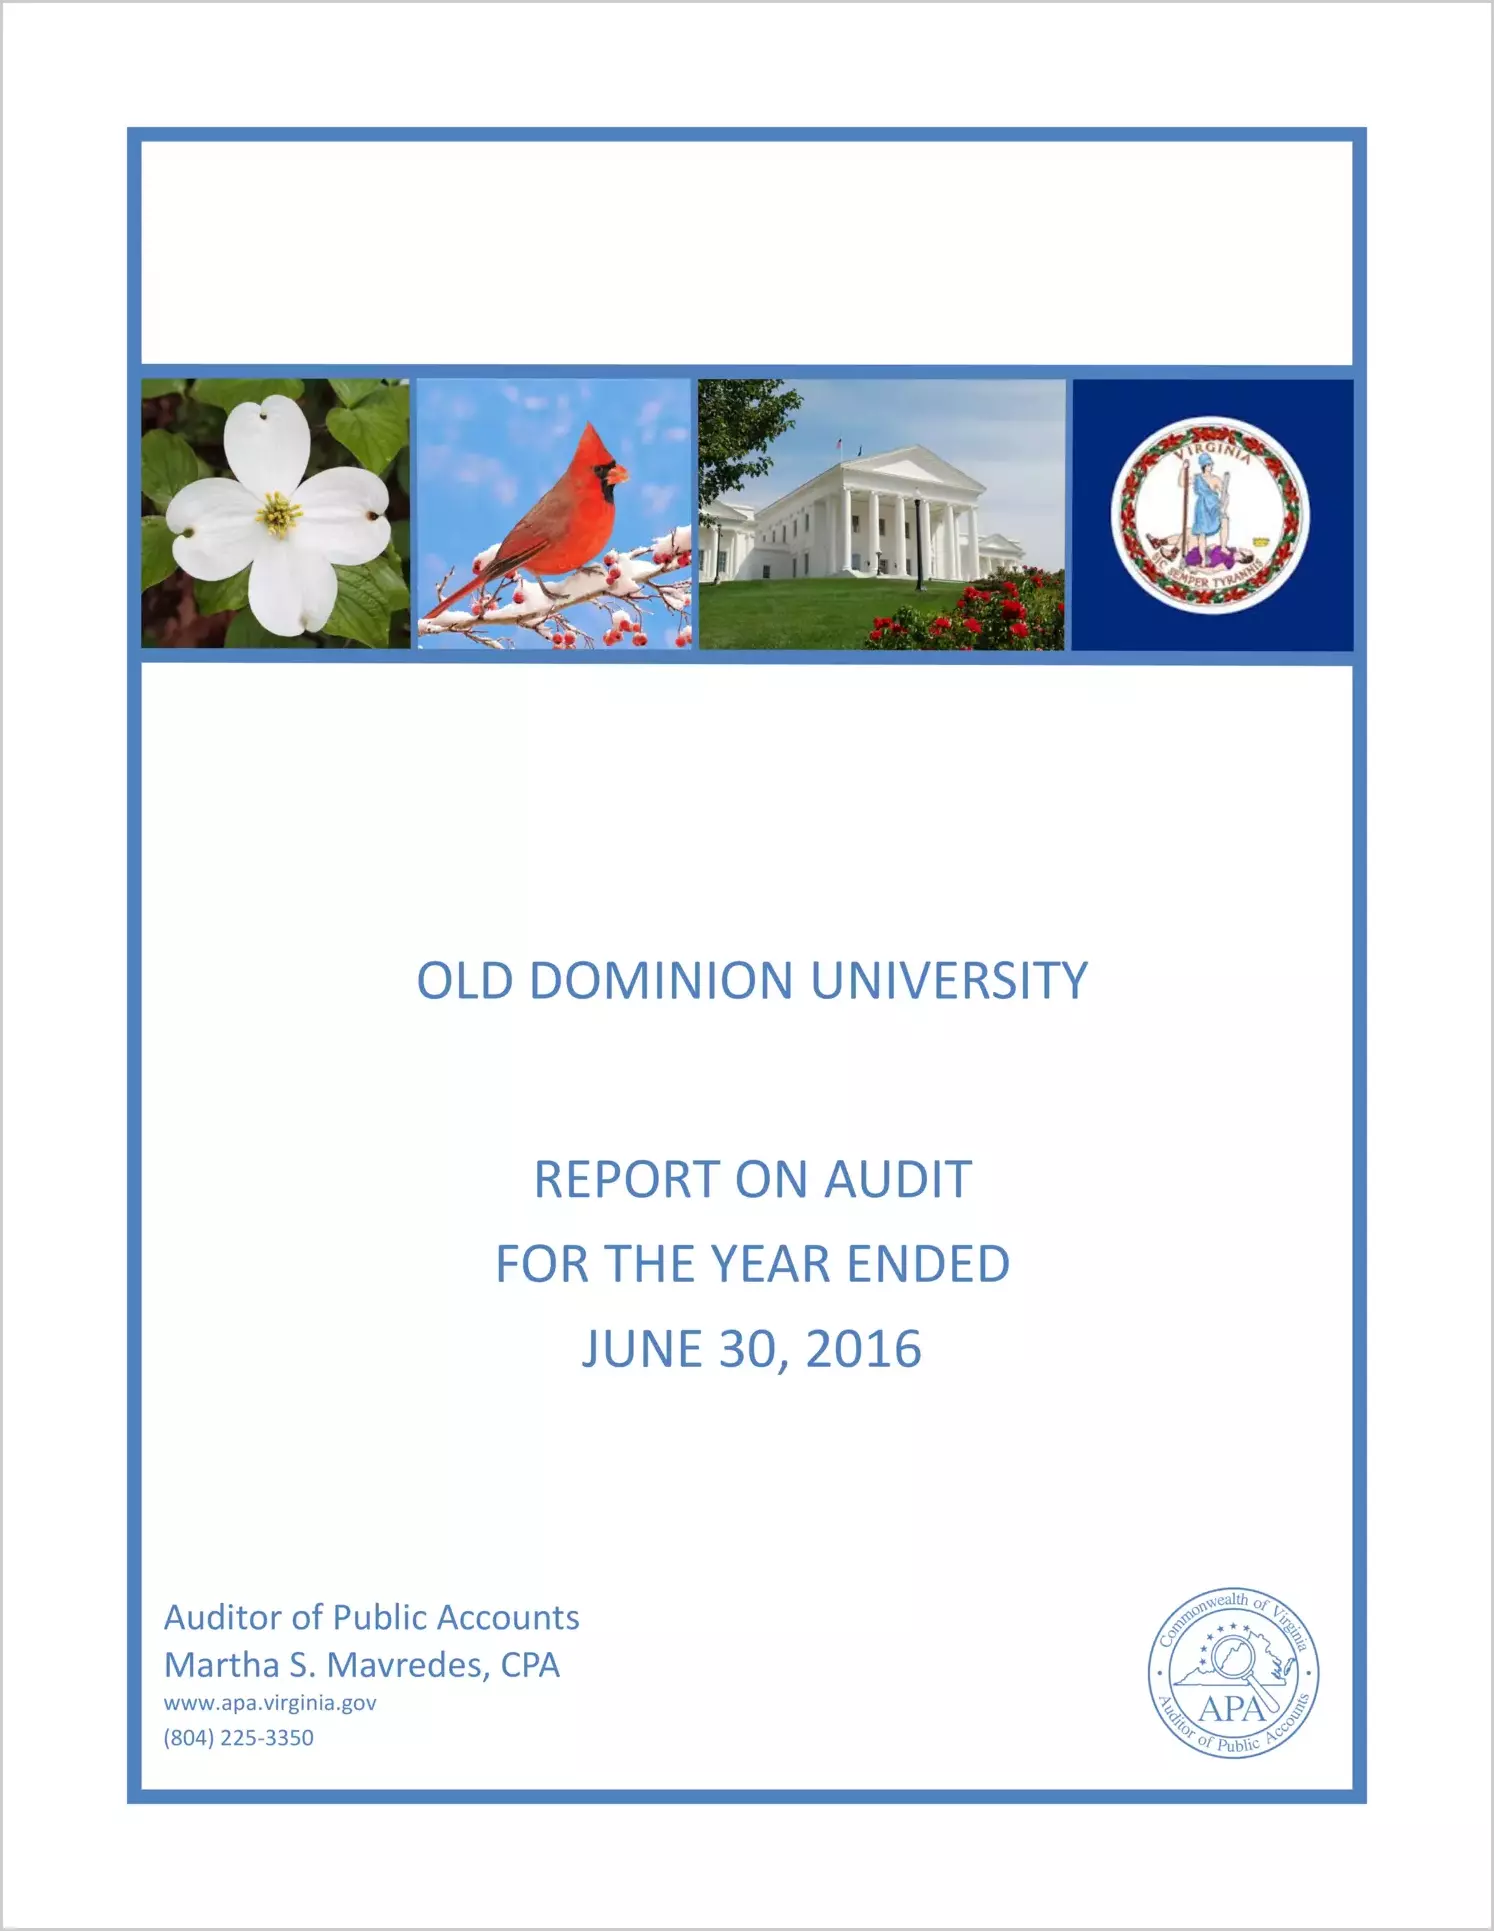 Old Dominion University for the year ended June 30, 2016